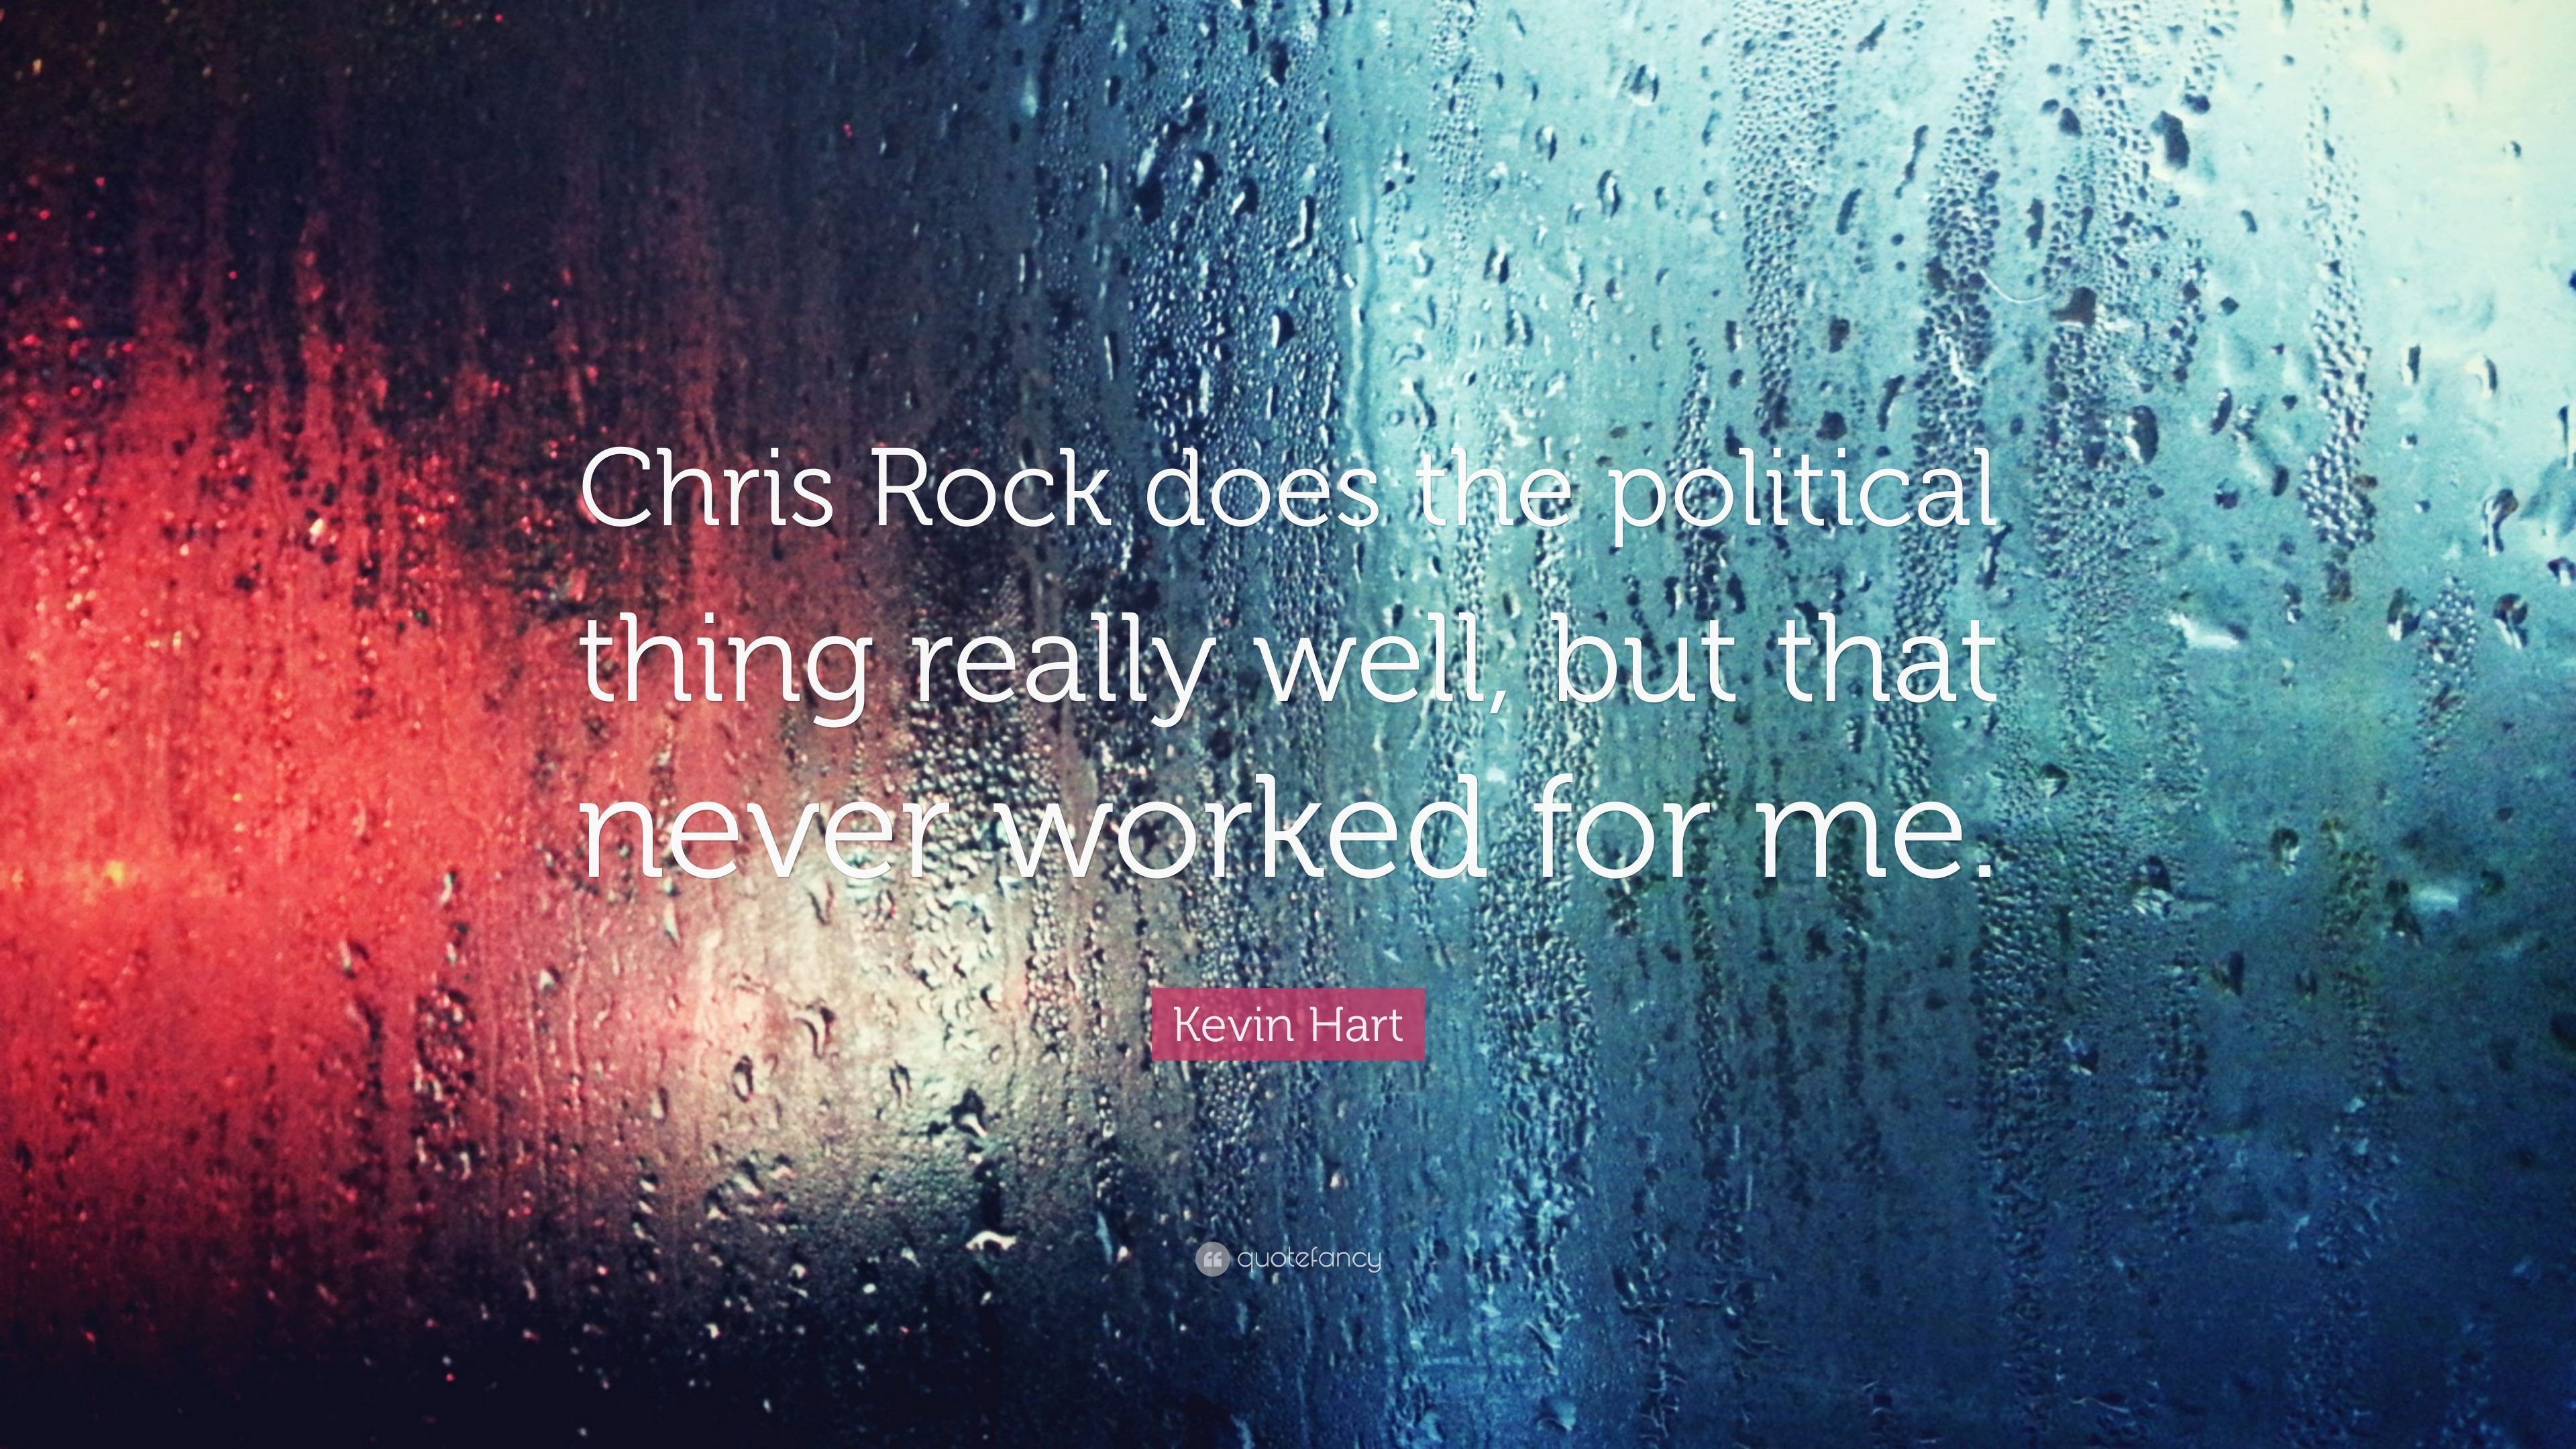 Kevin Hart Quote: “Chris Rock does the political thing really well